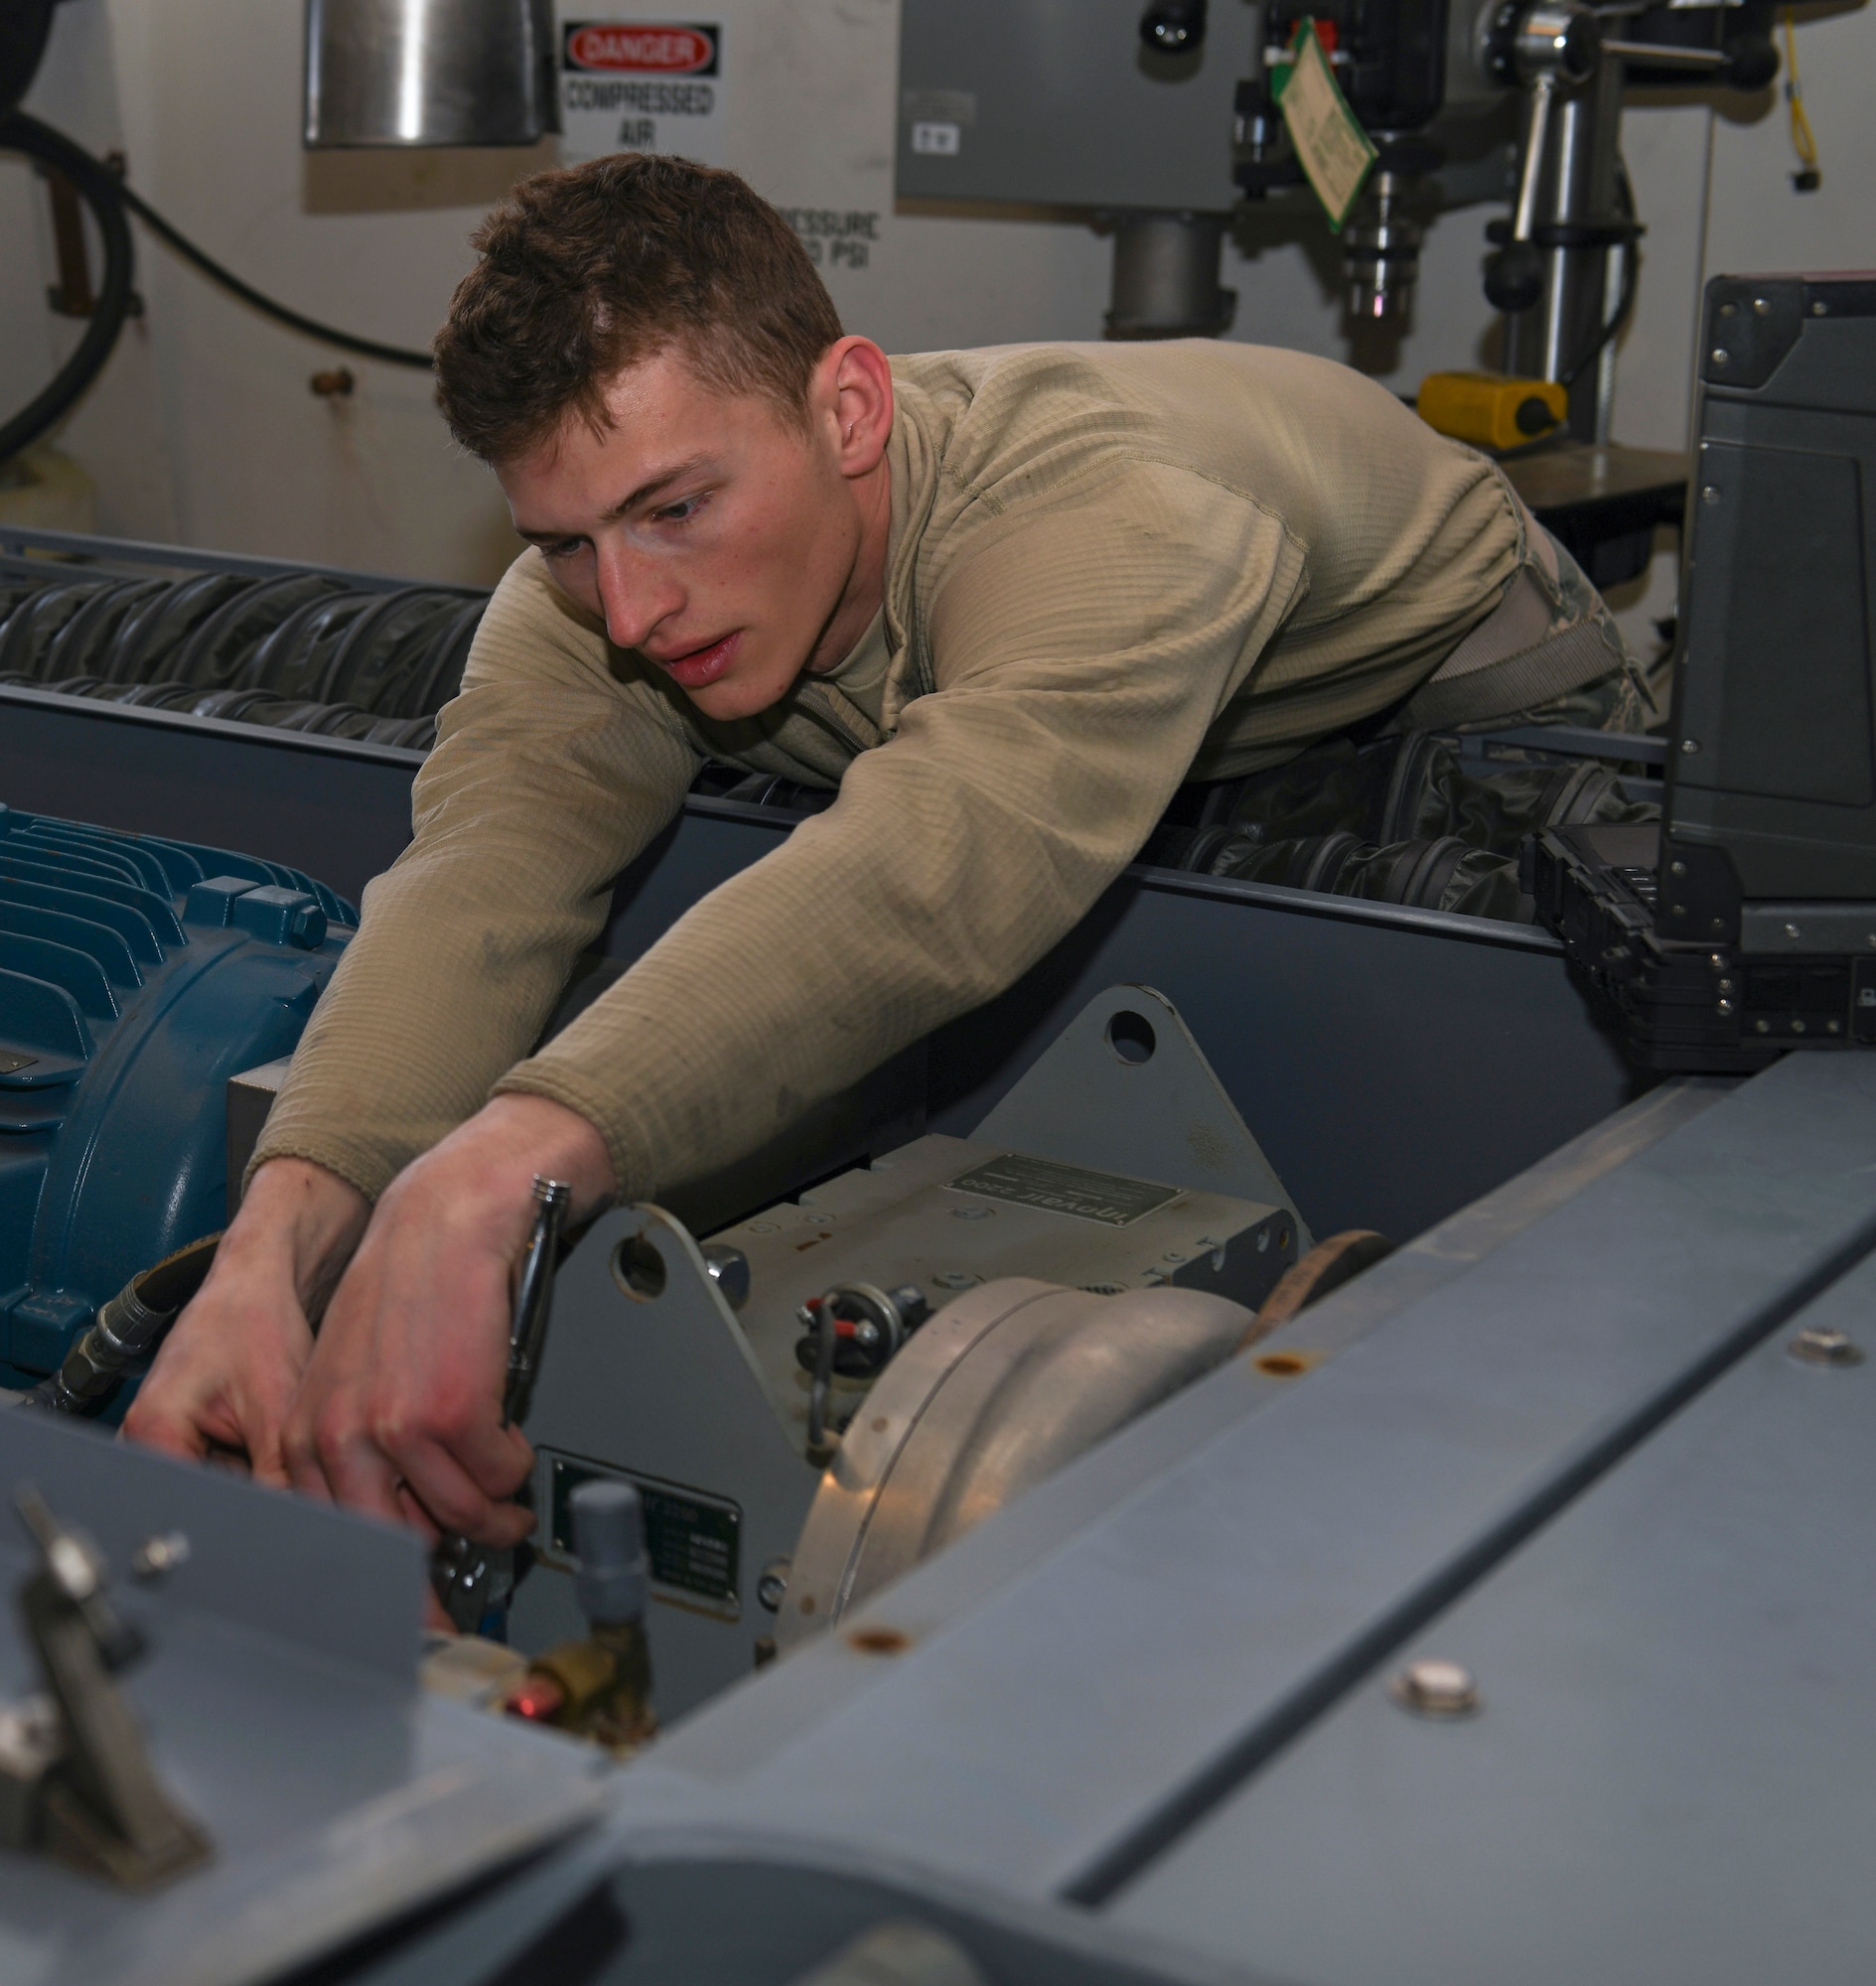 Senior Airman Cole Hardman, an Aerospace Ground Equipment mechanic in the 419th Maintenance Squadron, removes a coalescing filter during an inspection on an electric air cart March 7, 2020, at Hill Air Force Base, Utah